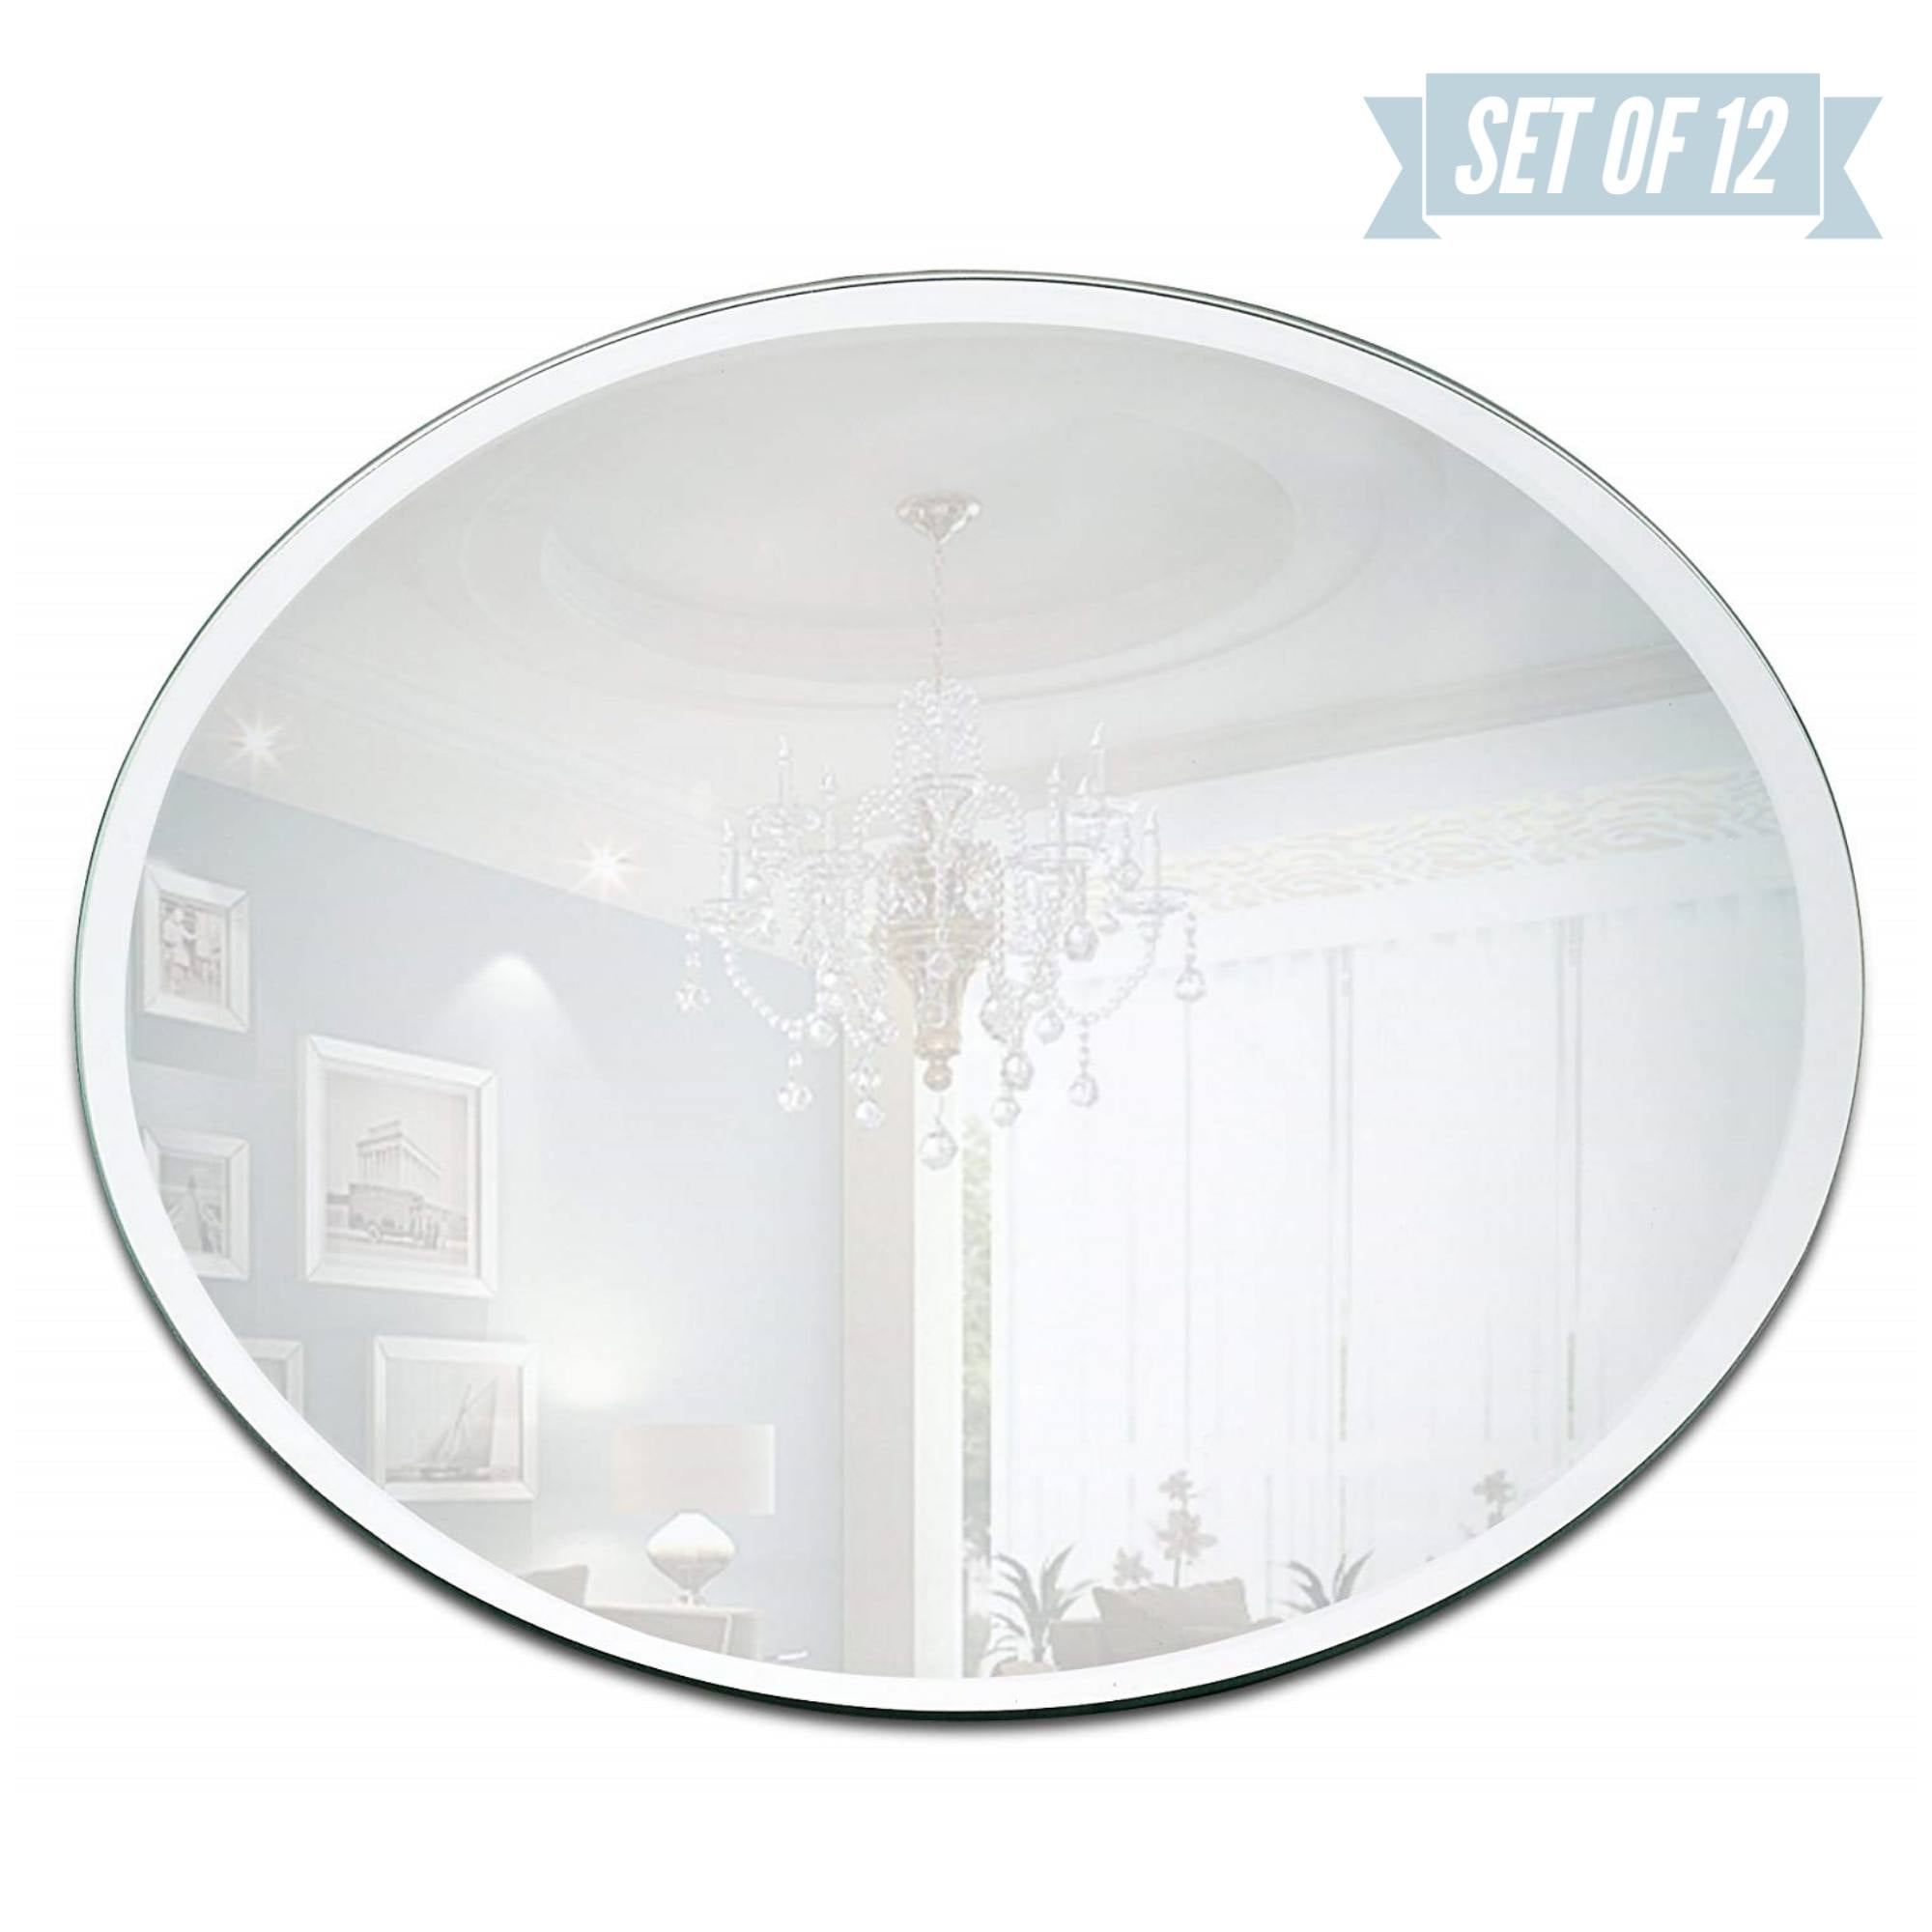 Prodbuy-Limited Vintage Round Mirrored Glass Candle Plate with Silver Iron Surround Small 